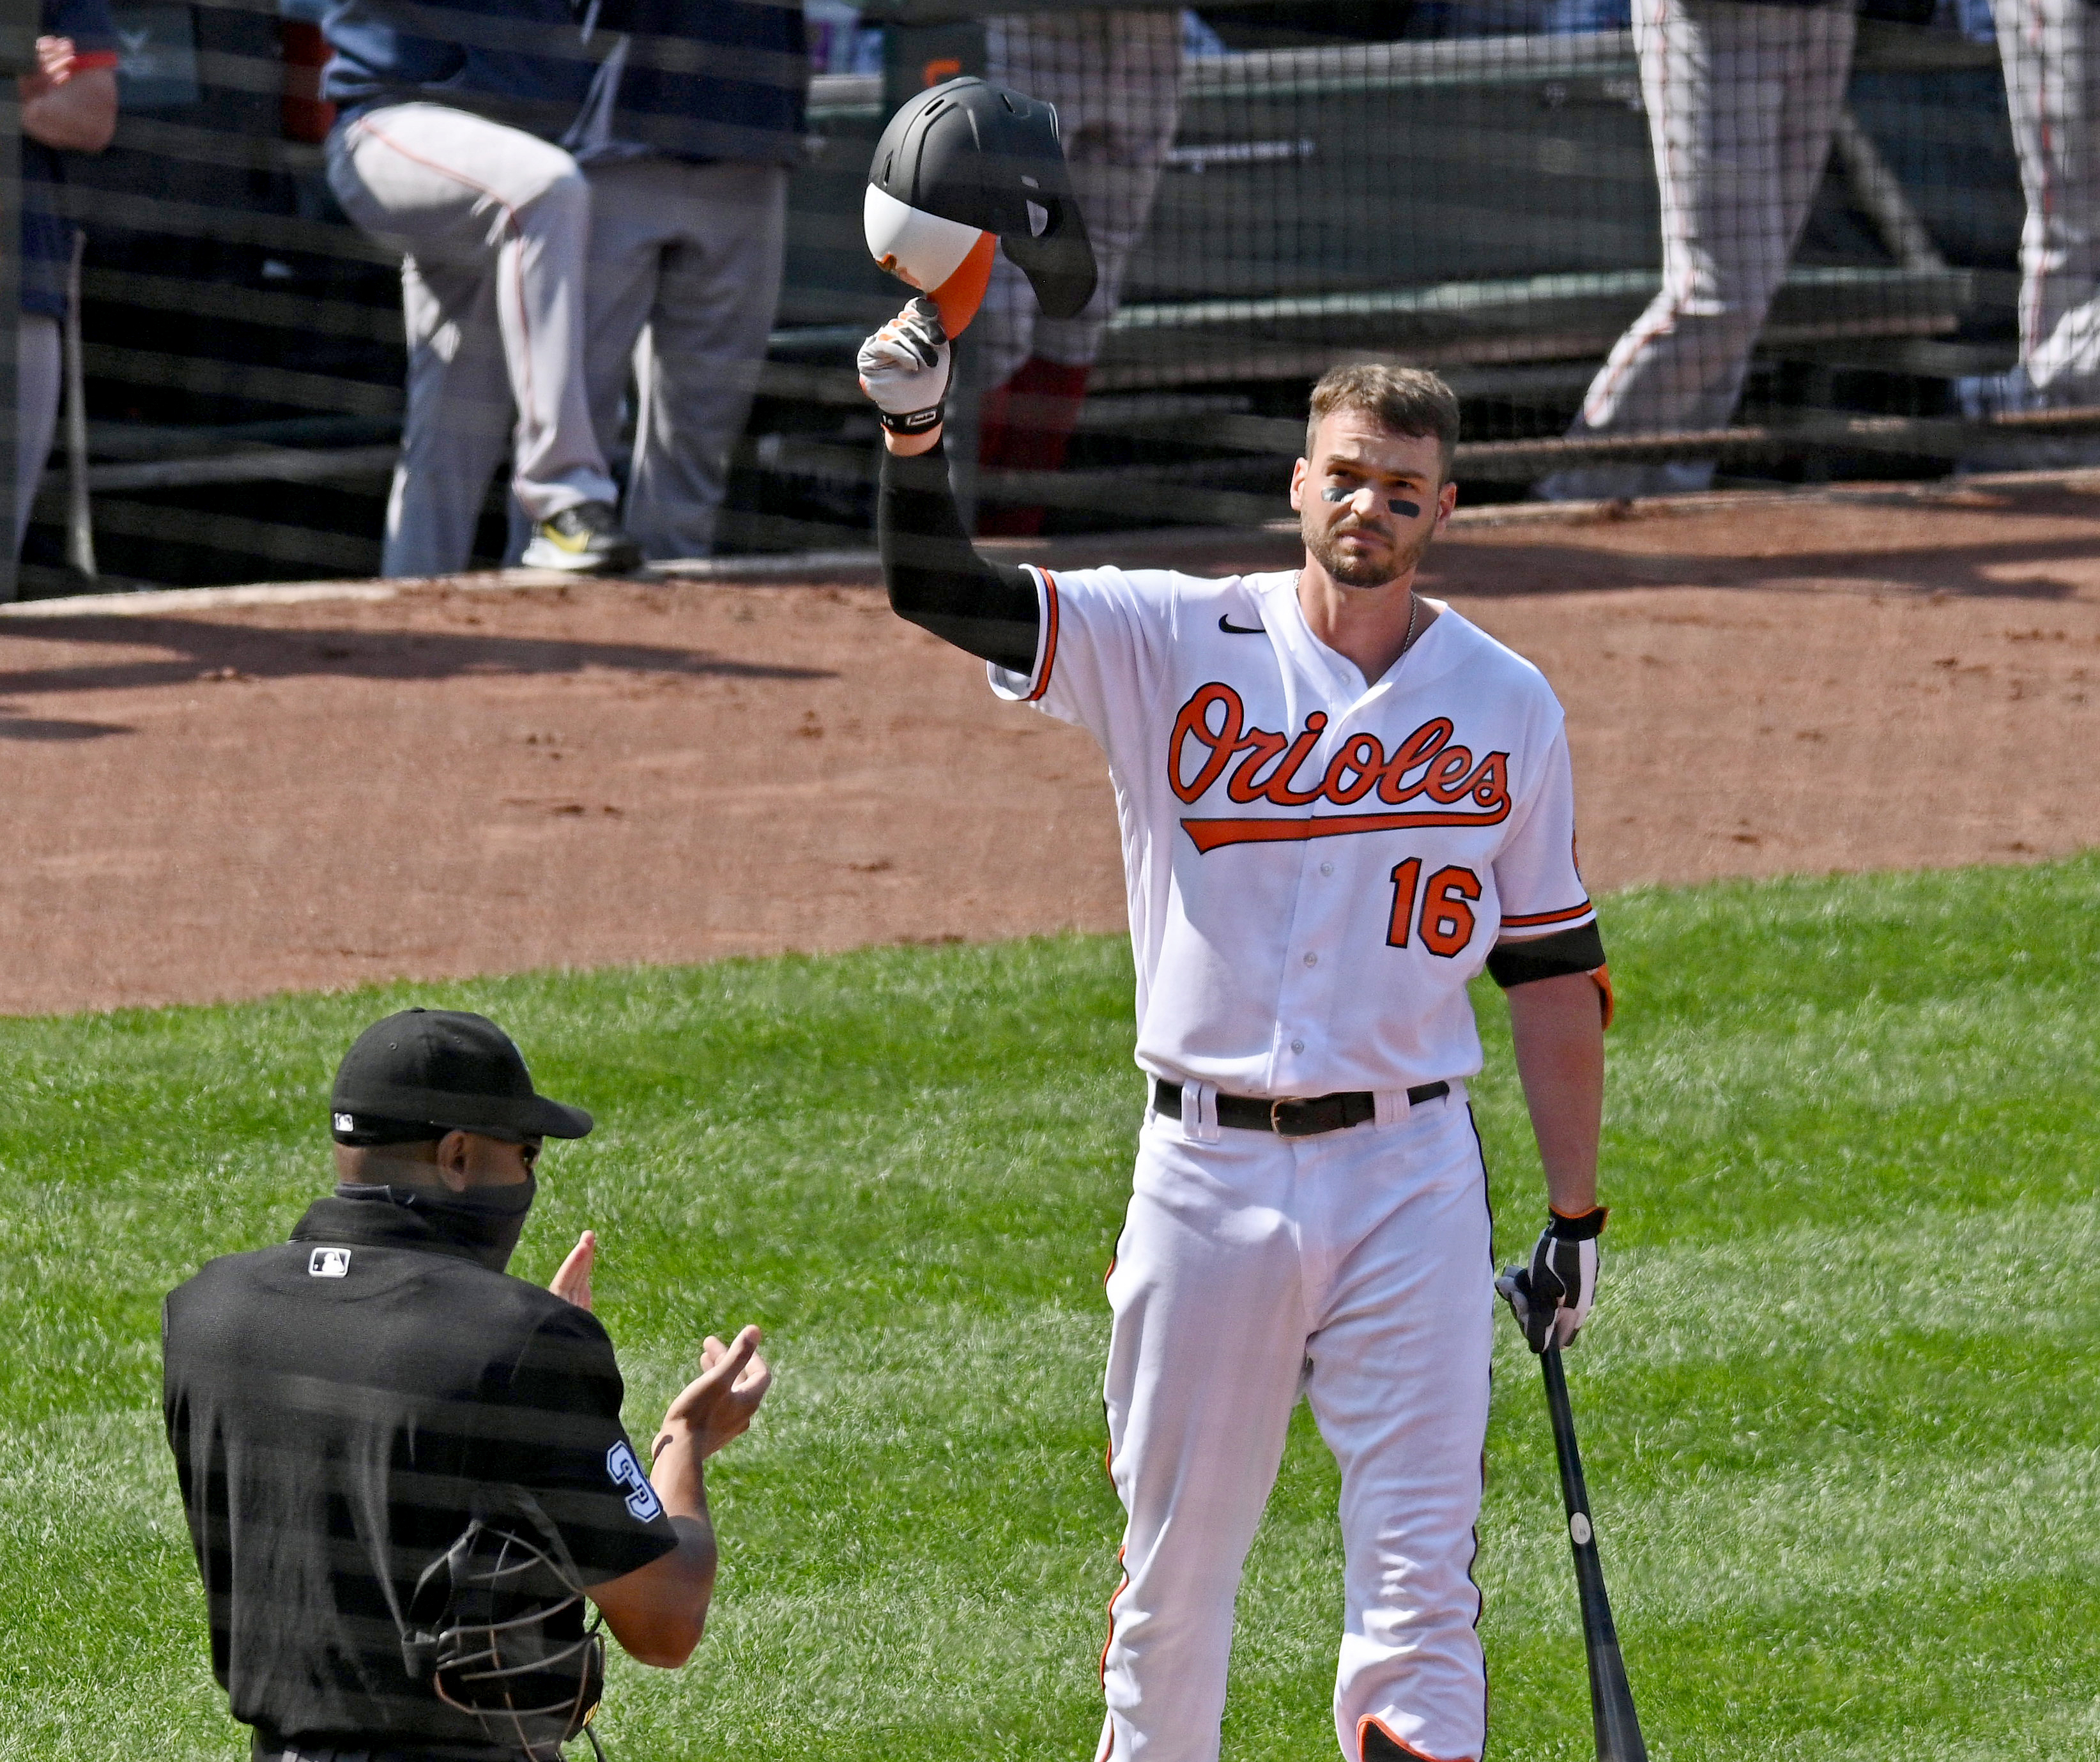 Orioles' Trey Mancini tips his helmut to fans' ovation as he comes up to bat against the Red Sox for the first time in the first inning of the O's 2021 season home opener at Oriole Park at Camden Yards on April 8, 2021.